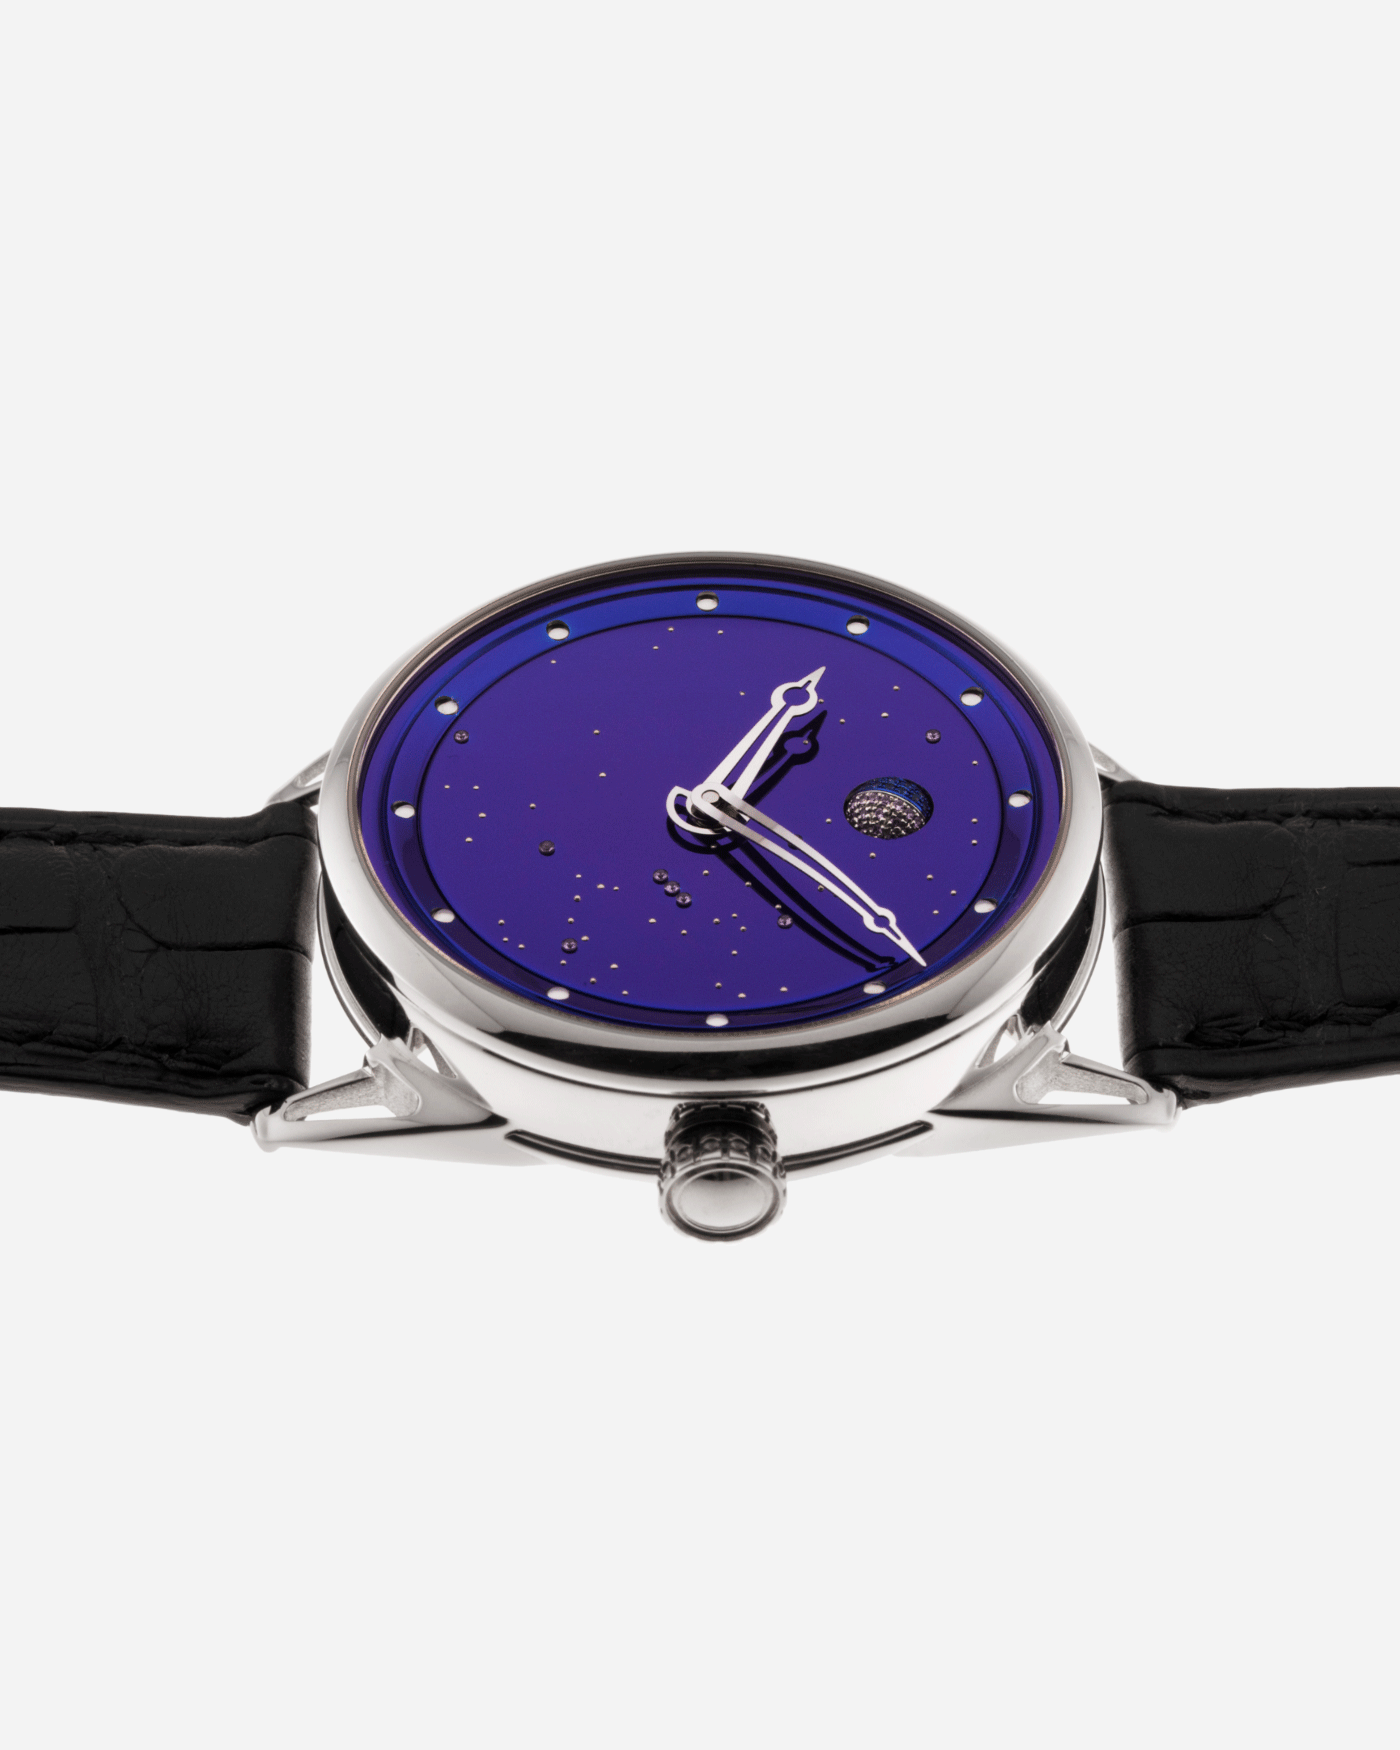 Brand: De Bethune Year: 2021 Model: Starry Sky Moonphase Reference: DB25 Material: Titanium Movement: In-House Cal. DB2106 Case Diameter: 40mm Strap: De Bethune Black Alligator with Titanium Tang Buckle